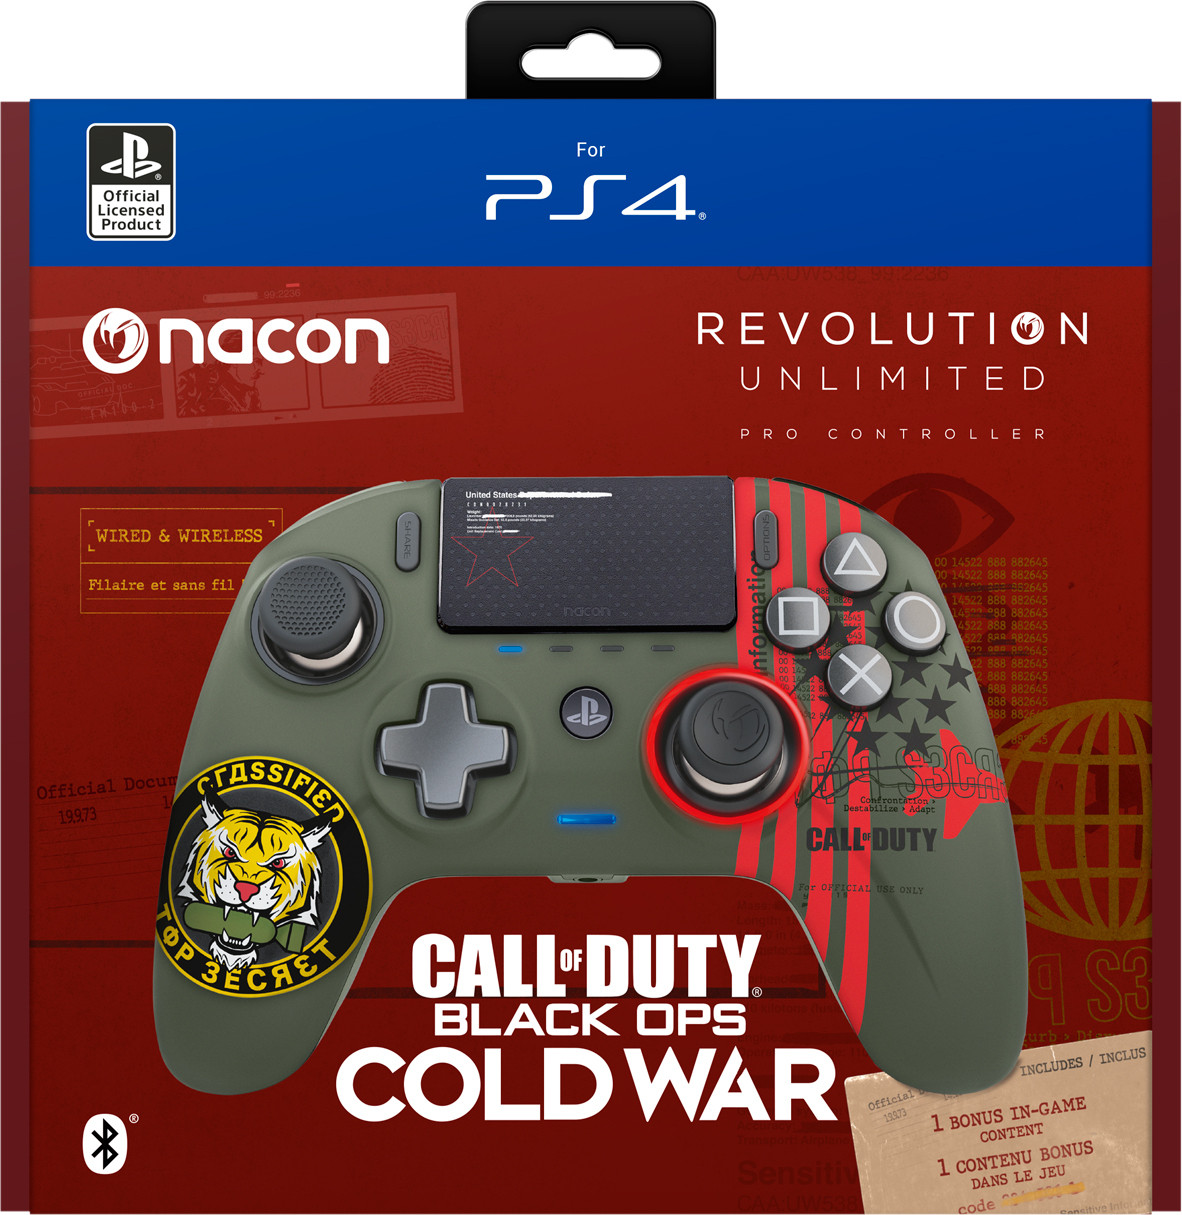 Nacon Revolution Unlimited Pro Controller Call of Duty Black Ops Cold War Limited Edition